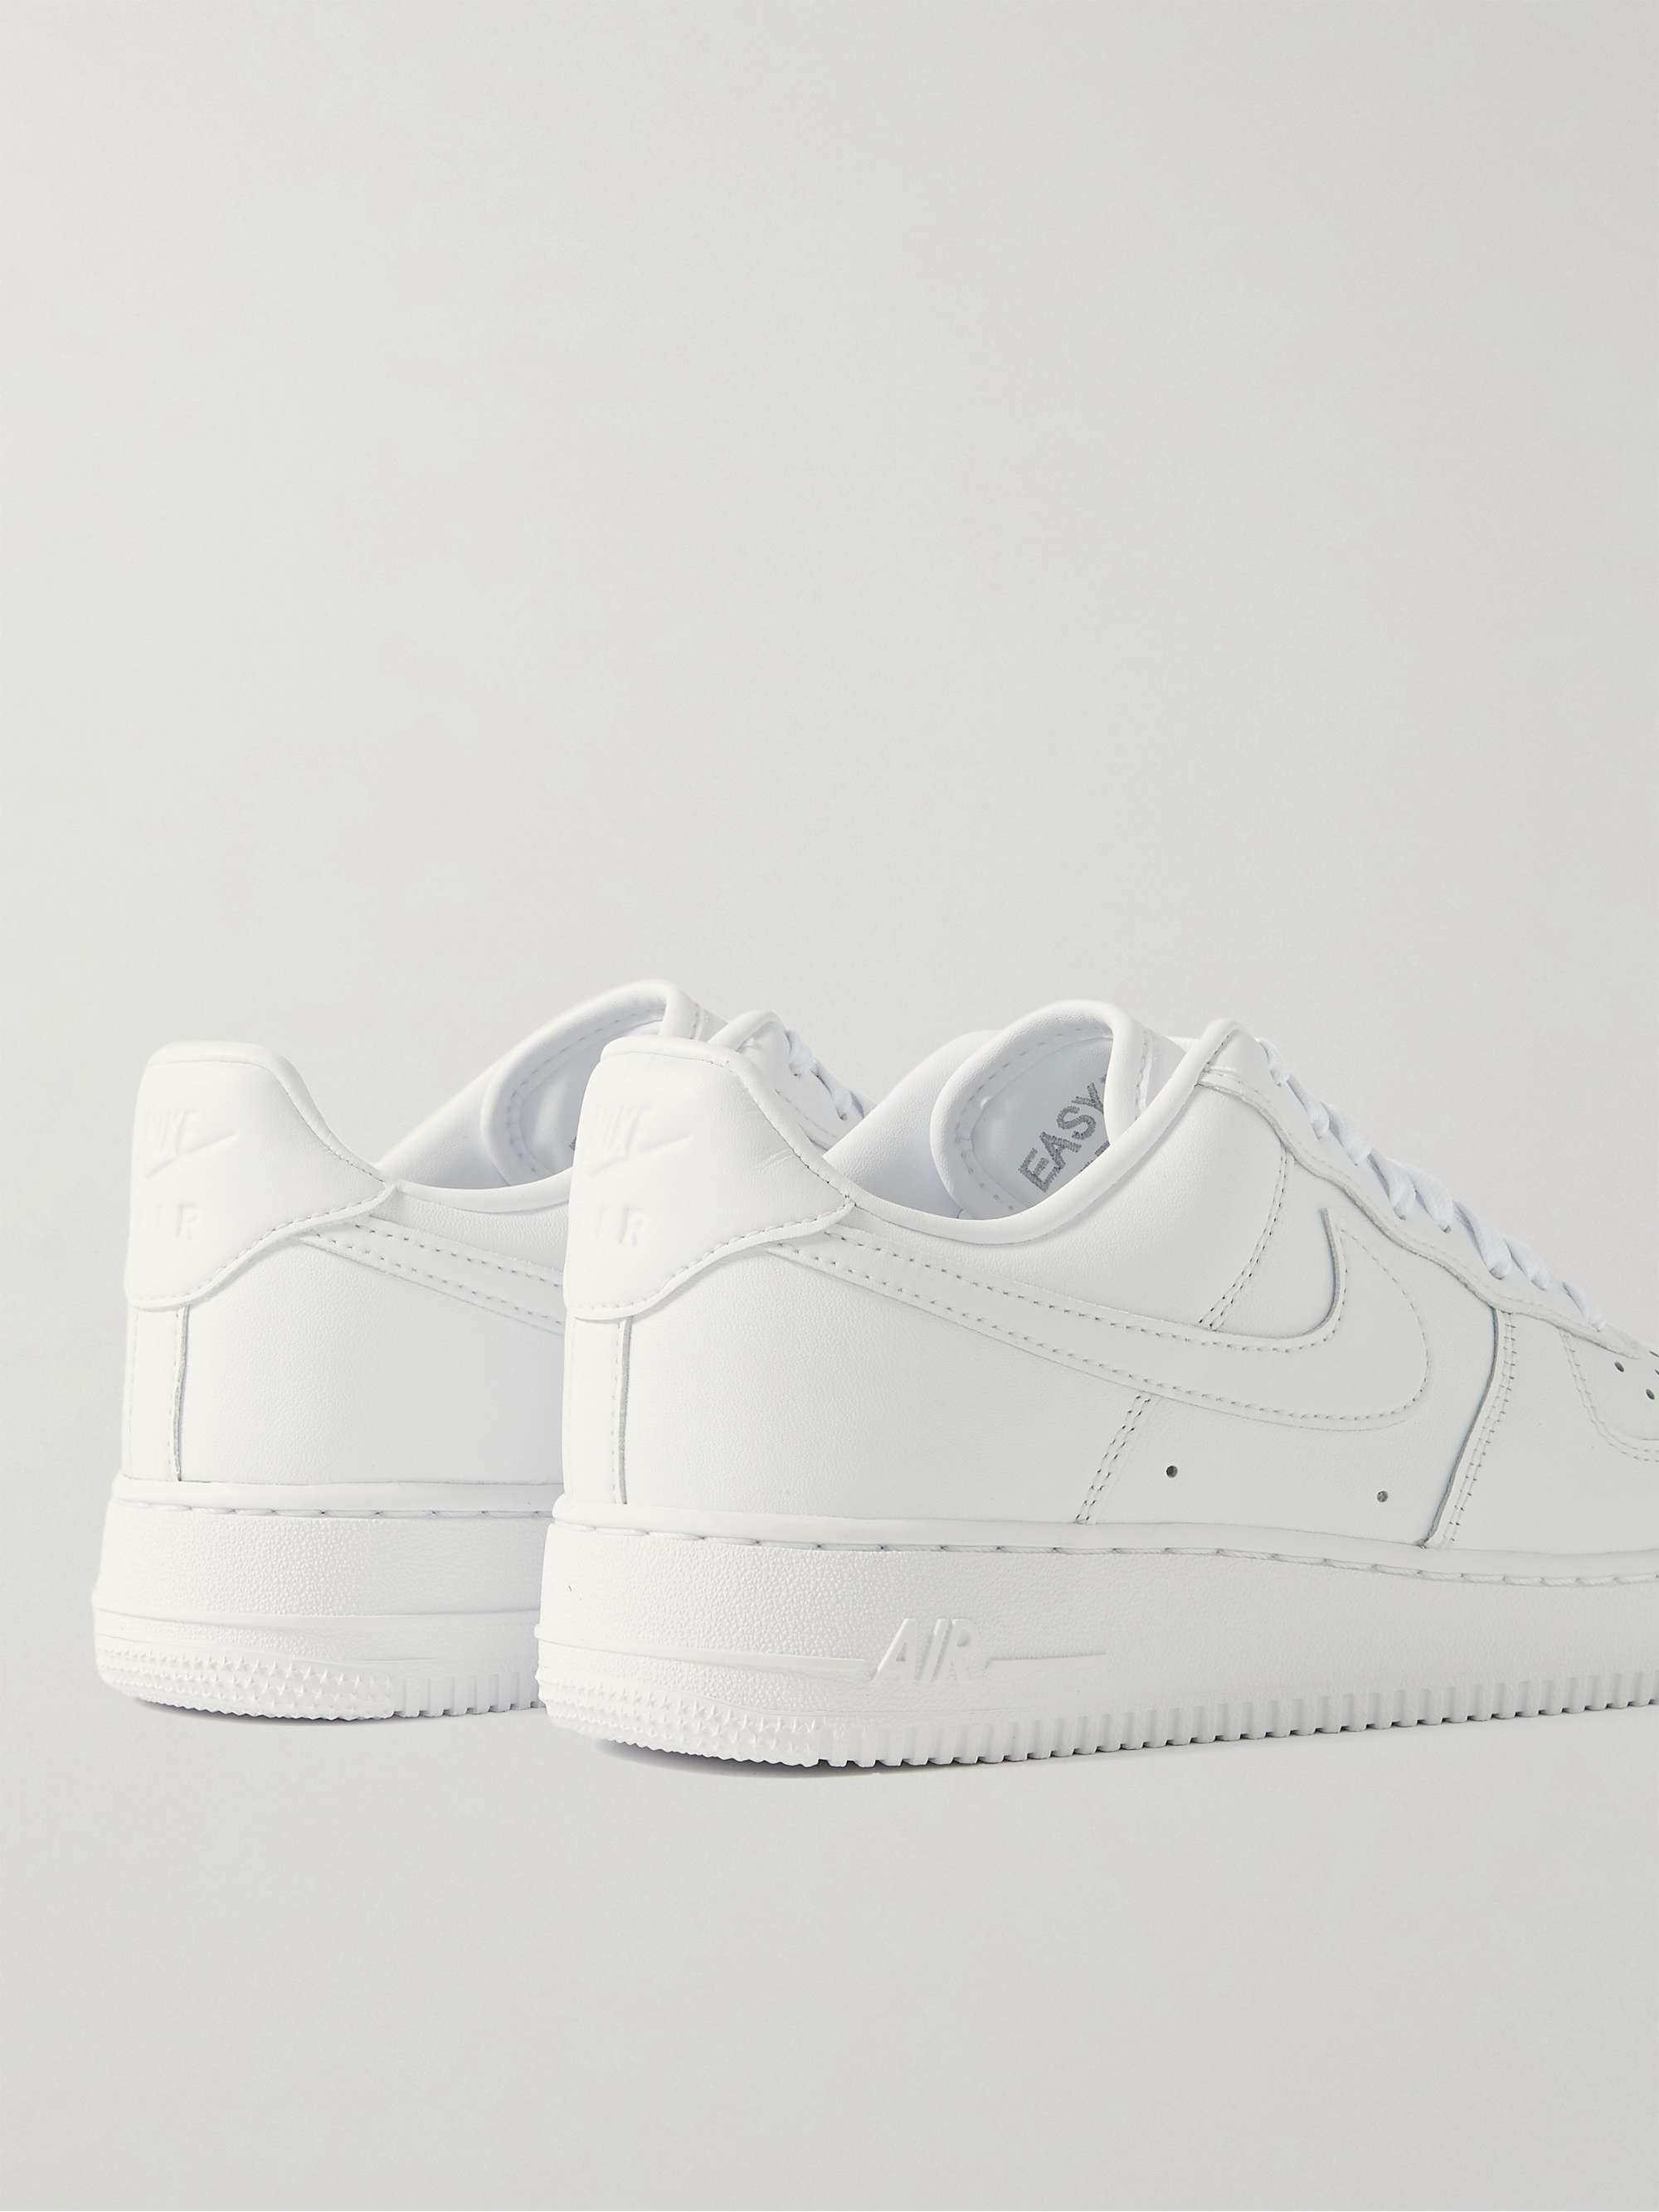 White Air Force 1 '07 Fresh Leather Sneakers | NIKE | MR PORTER